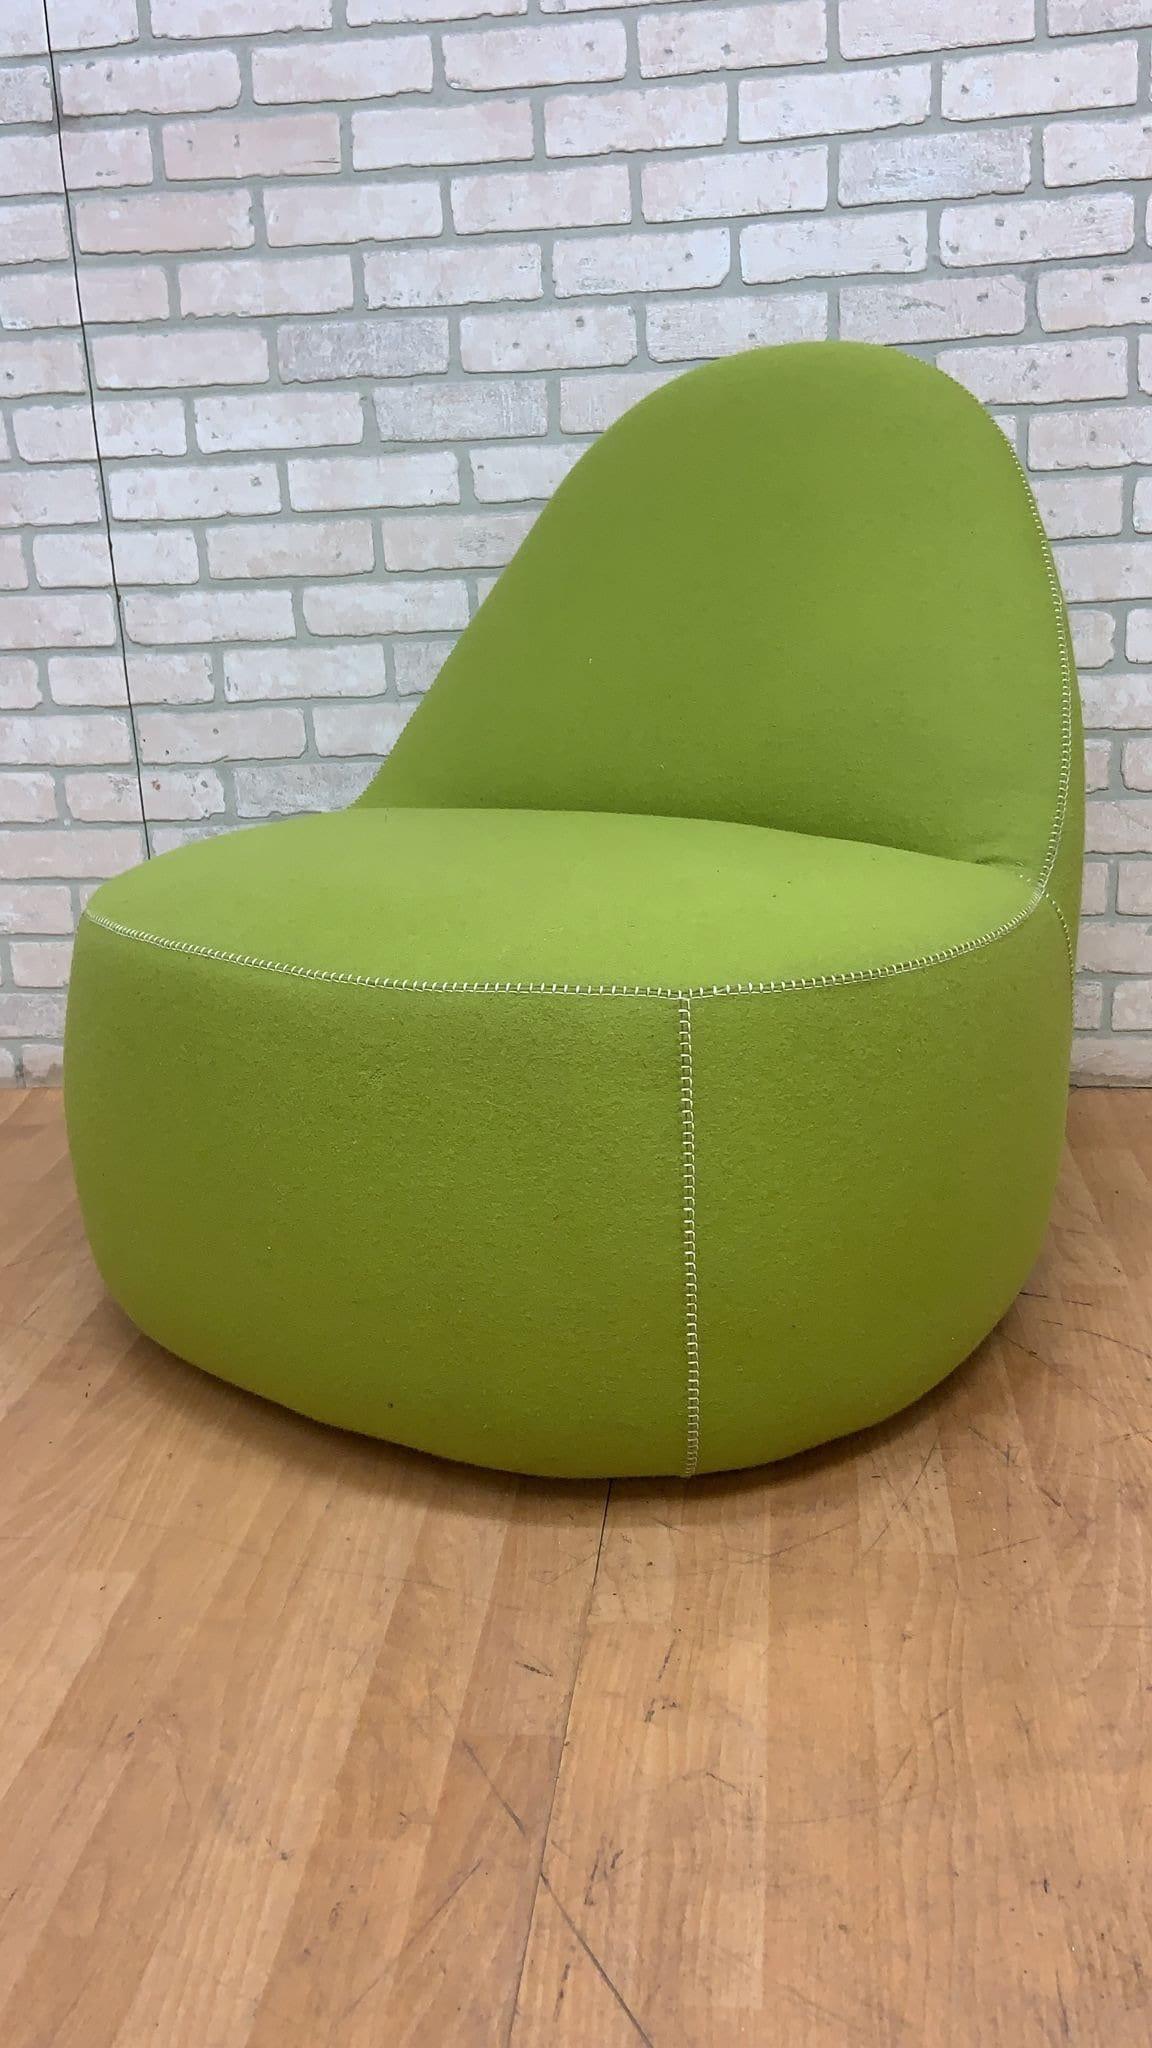 Modern Bernhardt Design Mitt Lounge Chair in Aloe Green with White Master Stitching with Matching Handle 

The Mitt Lounge designed by El Salvadoran Designers Harry and Claudia Washington for Bernhardt Design. The Chair’s Comfortable and Relaxed